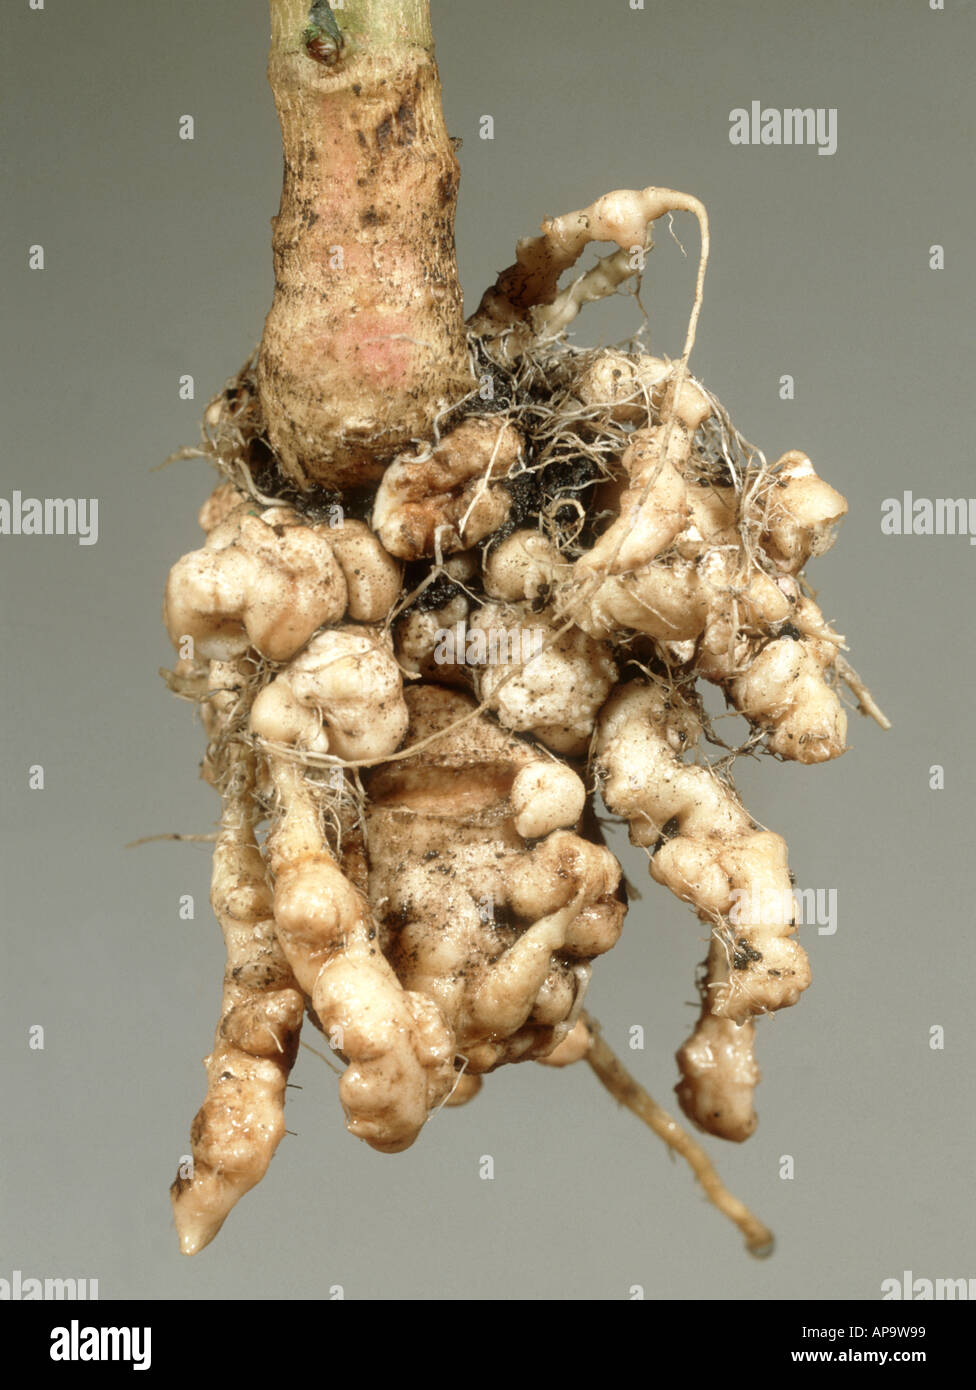 Clubroot Plasmodiophora brassicae causing severe deformation of cabbage root Brassica Stock Photo